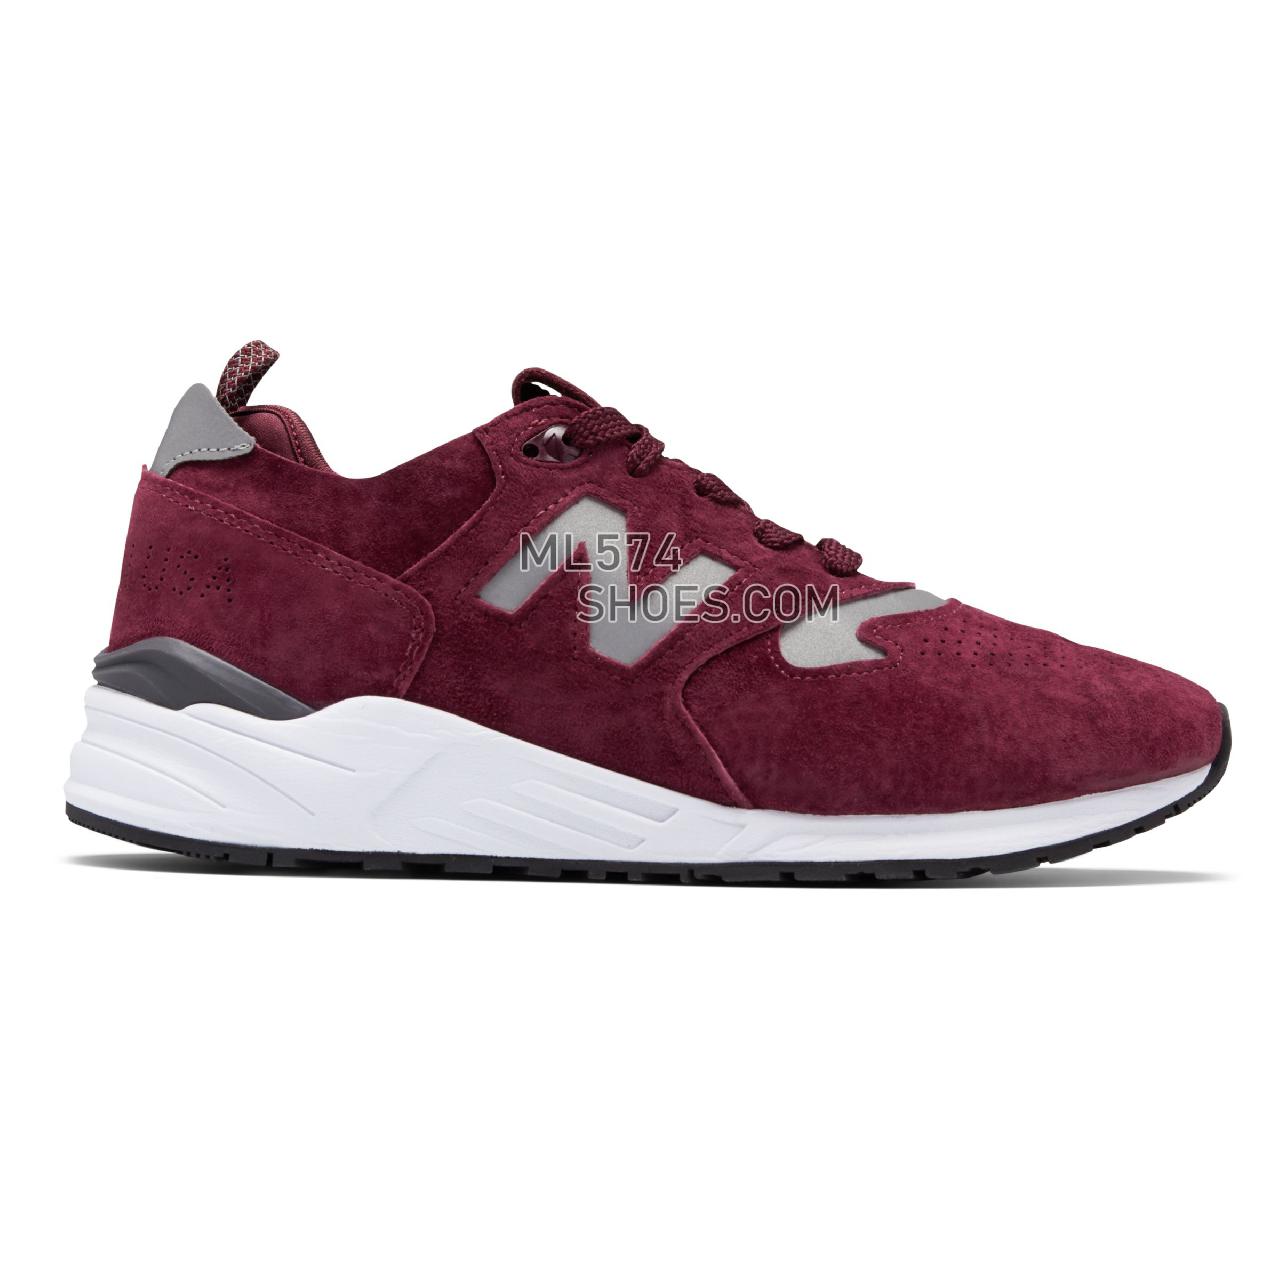 New Balance 999 Made in US - Men's 999 - Classic Burgundy with White - M999RTG